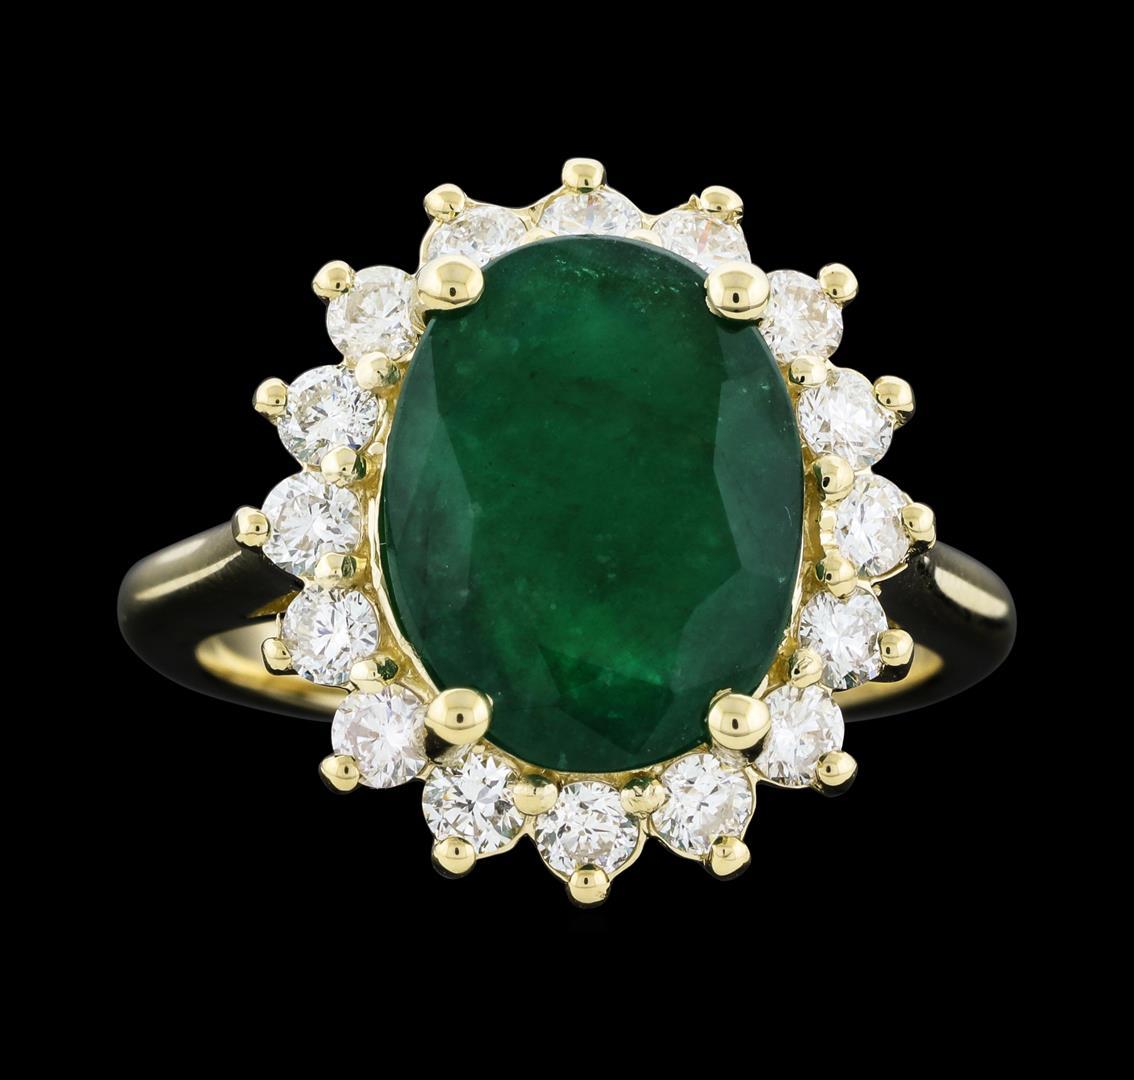 4.52 ctw Emerald and Diamond Ring - 14KT Yellow Gold